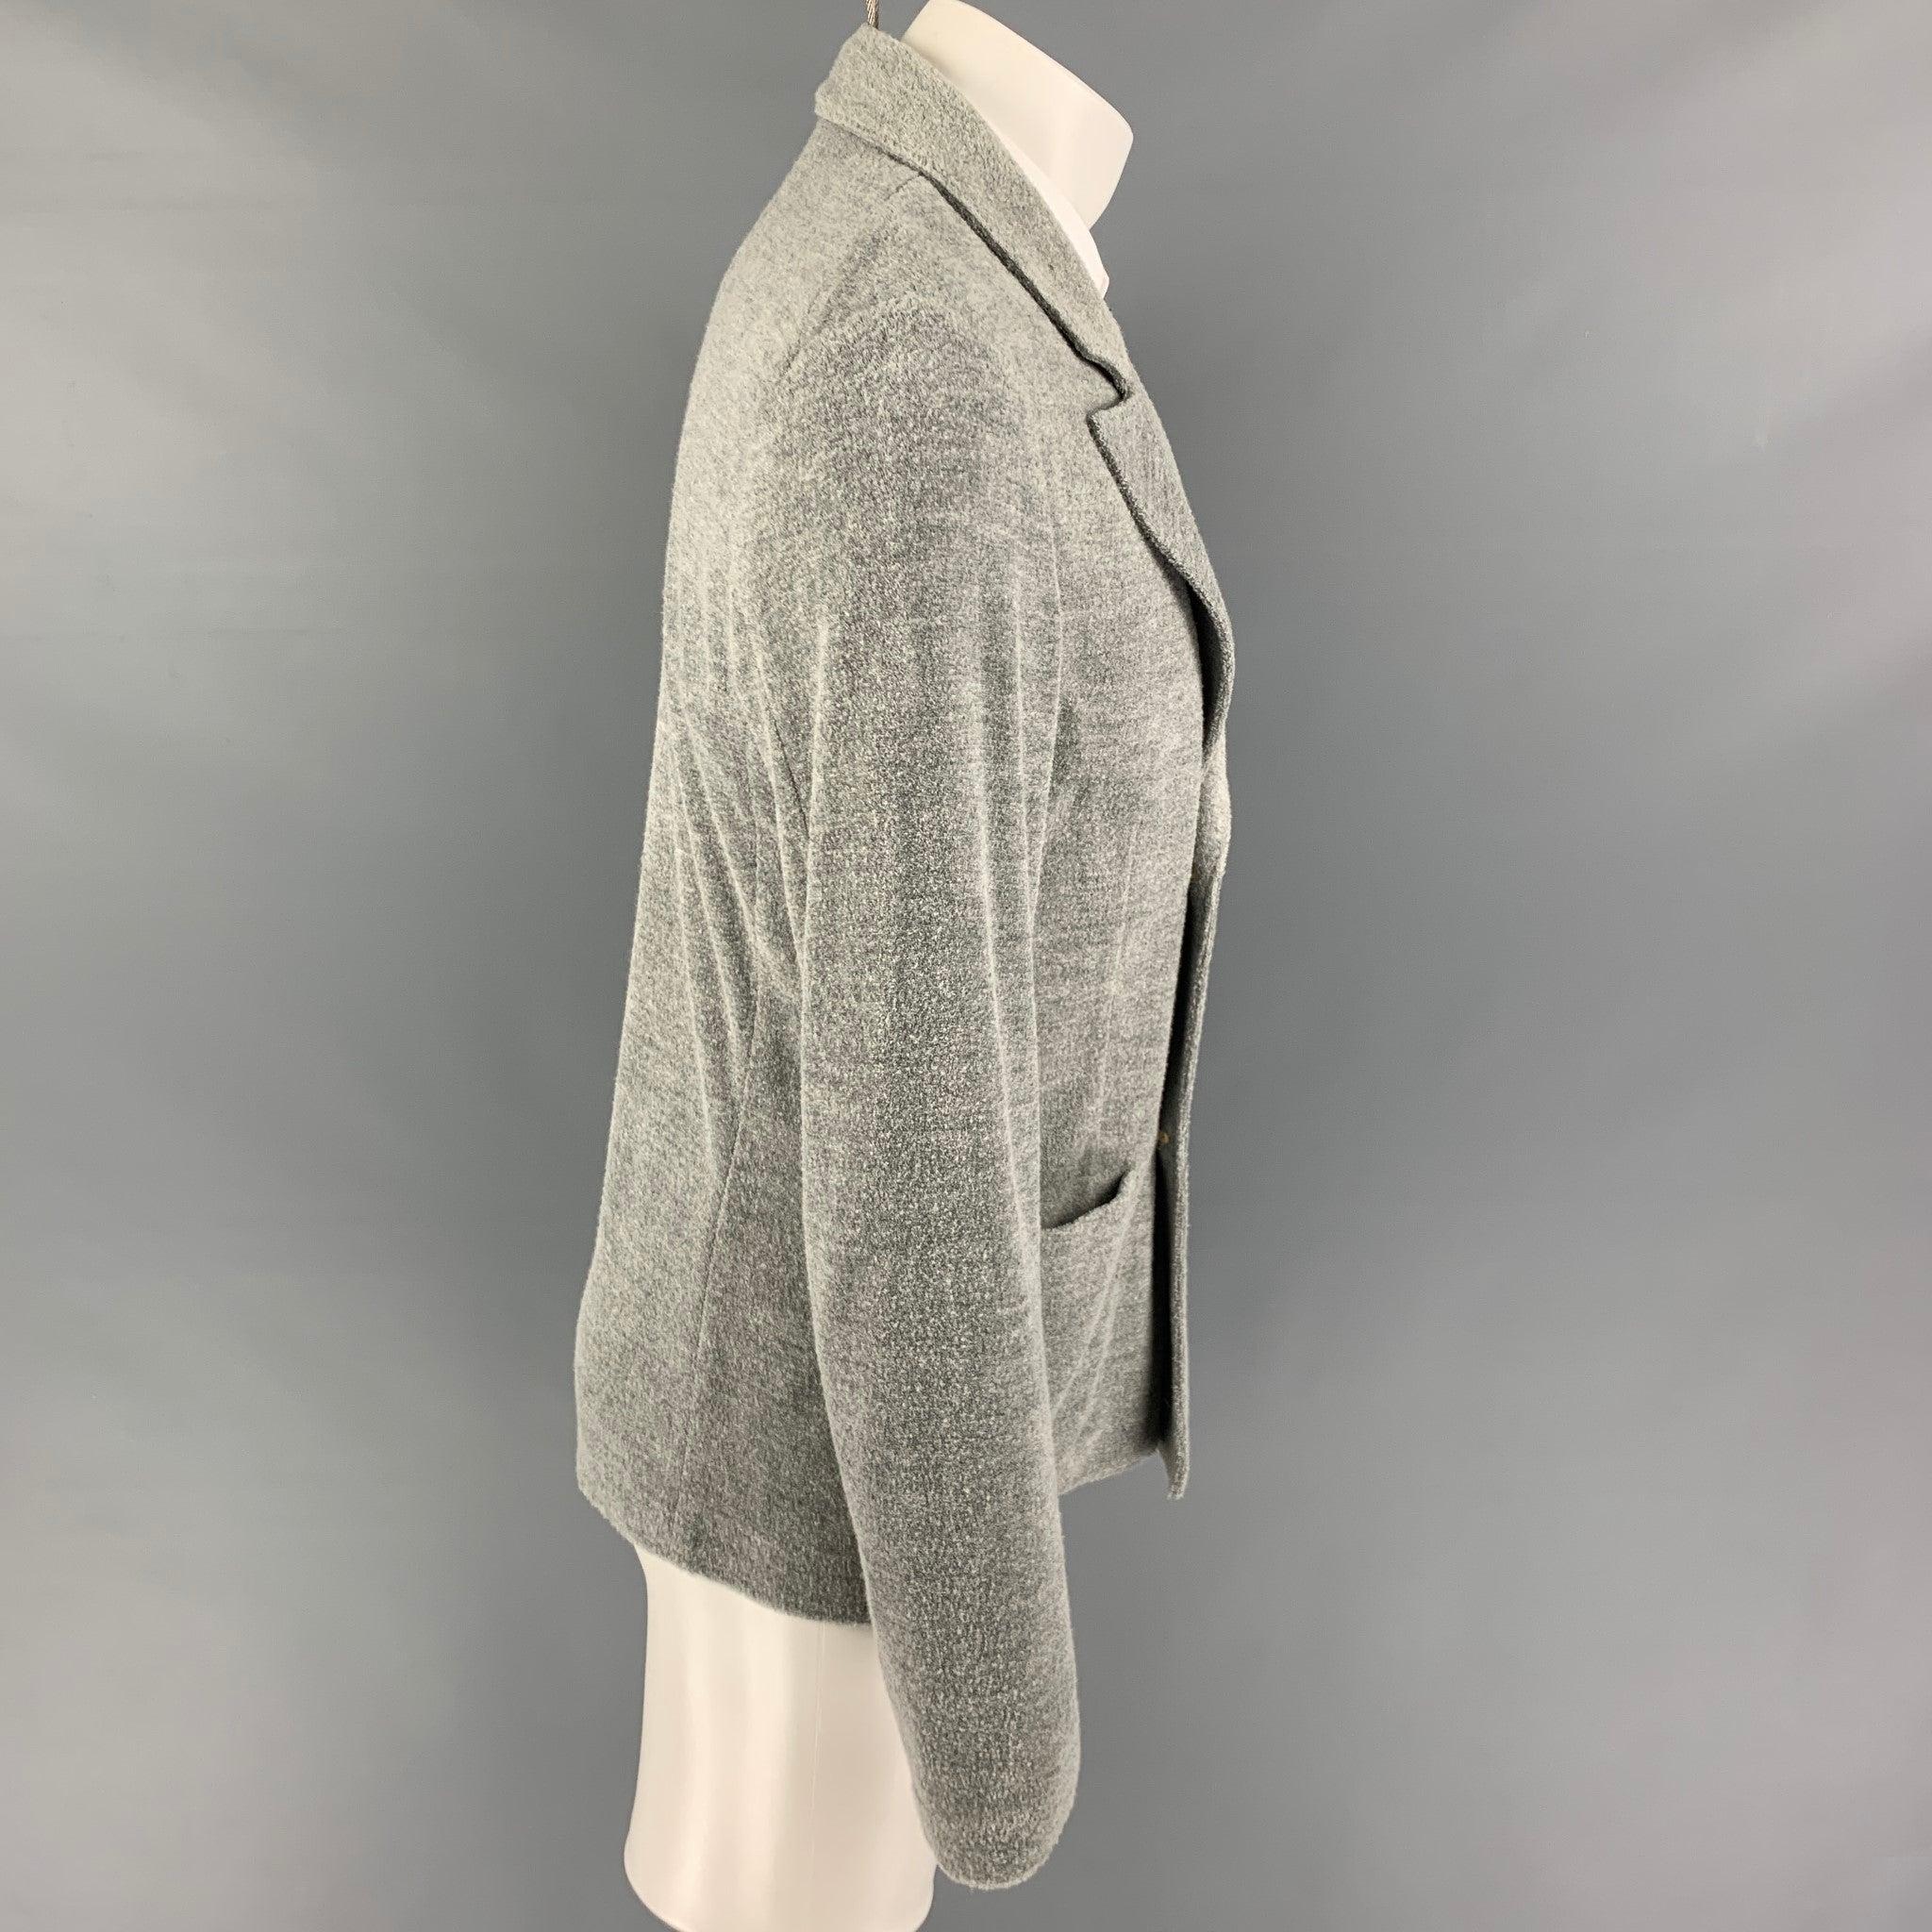 GIORGIO ARMANI sport coat comes in a gray textured cotton blend featuring a peak lapel, patch pockets, and a double breasted closure. Made in Italy. Very Good
Pre-Owned Condition. 

Marked:   52 

Measurements: 
 
Shoulder: 18 inches Chest: 42